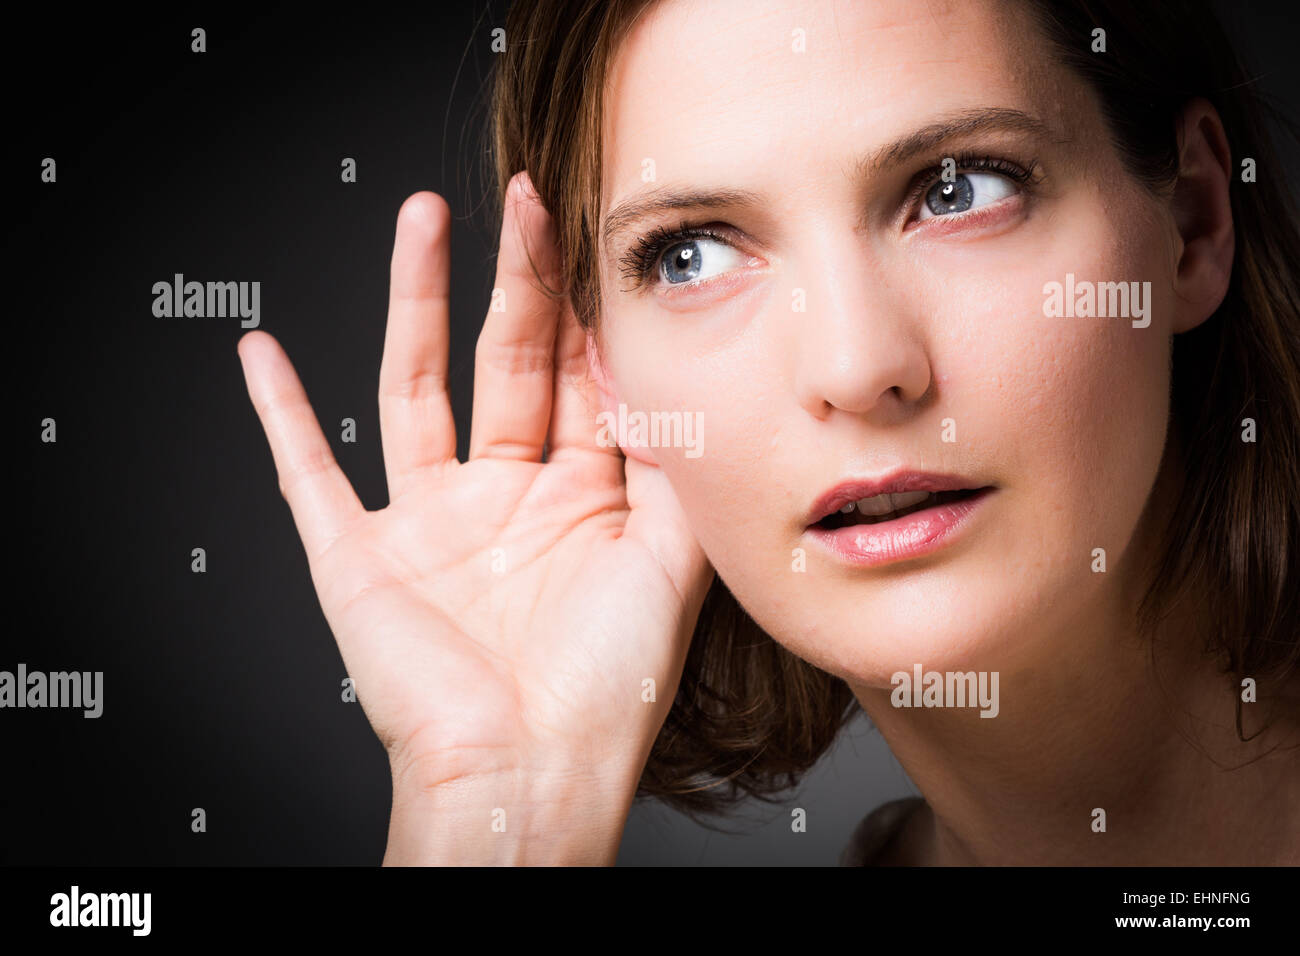 Woman holding hand to her ear. Stock Photo